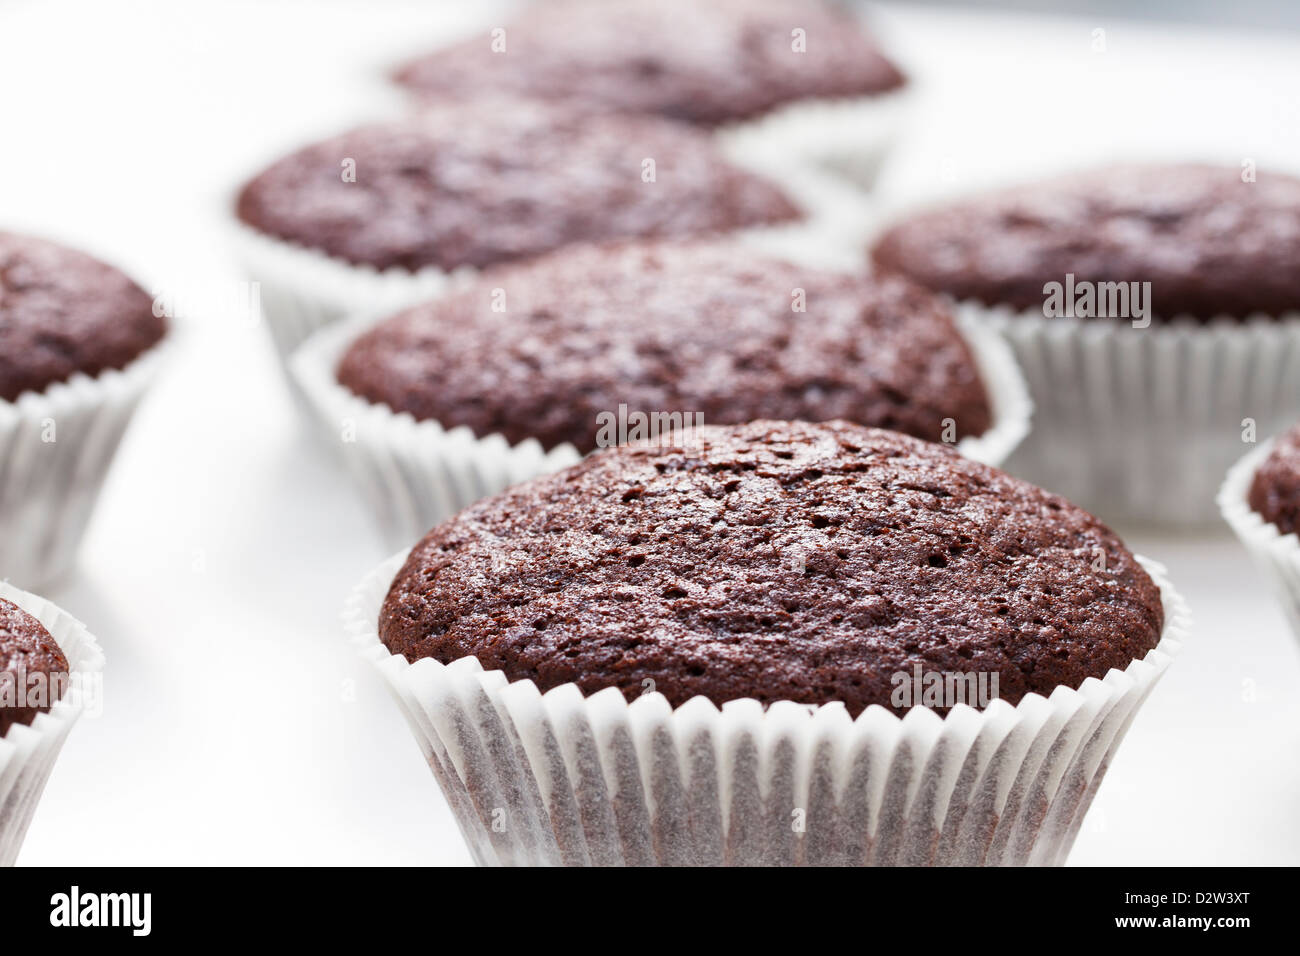 Chocolate cupcake ready to be decorated. Stock Photo